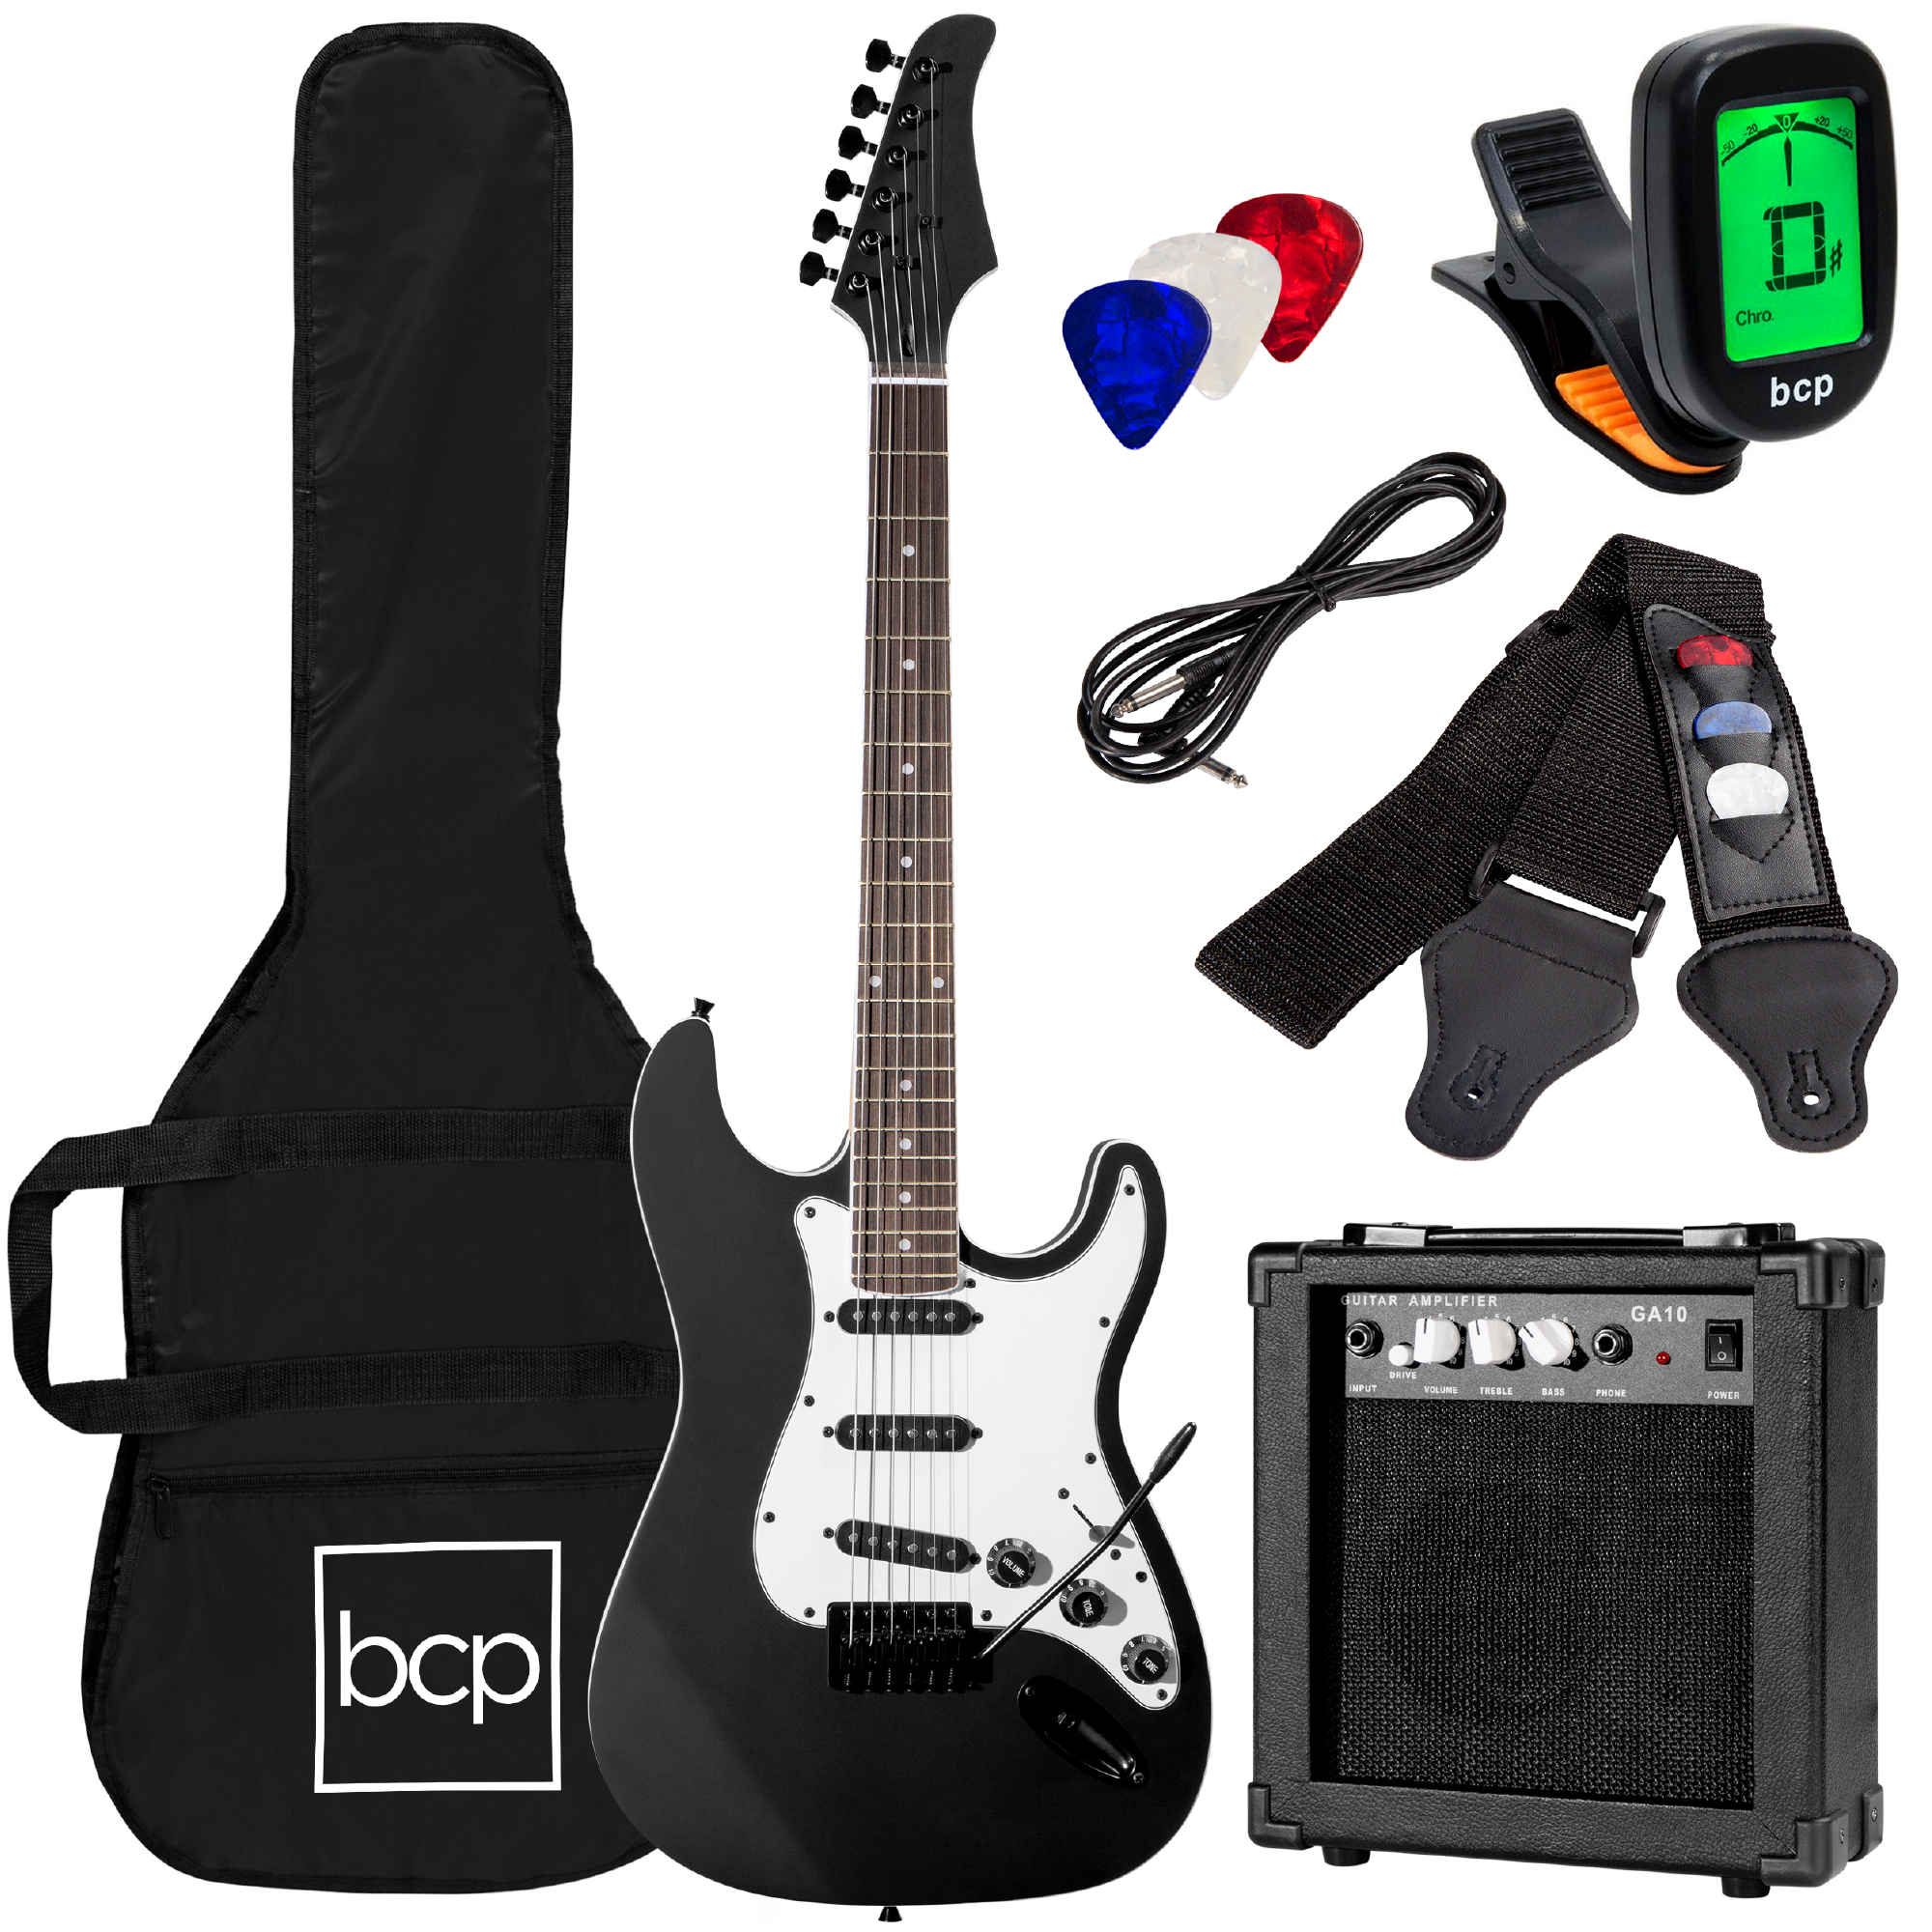 Best Choice Products 39in Full Size Beginner Electric Guitar Kit with Case, Strap, Amp, Whammy Bar - Jet Black - image 1 of 6